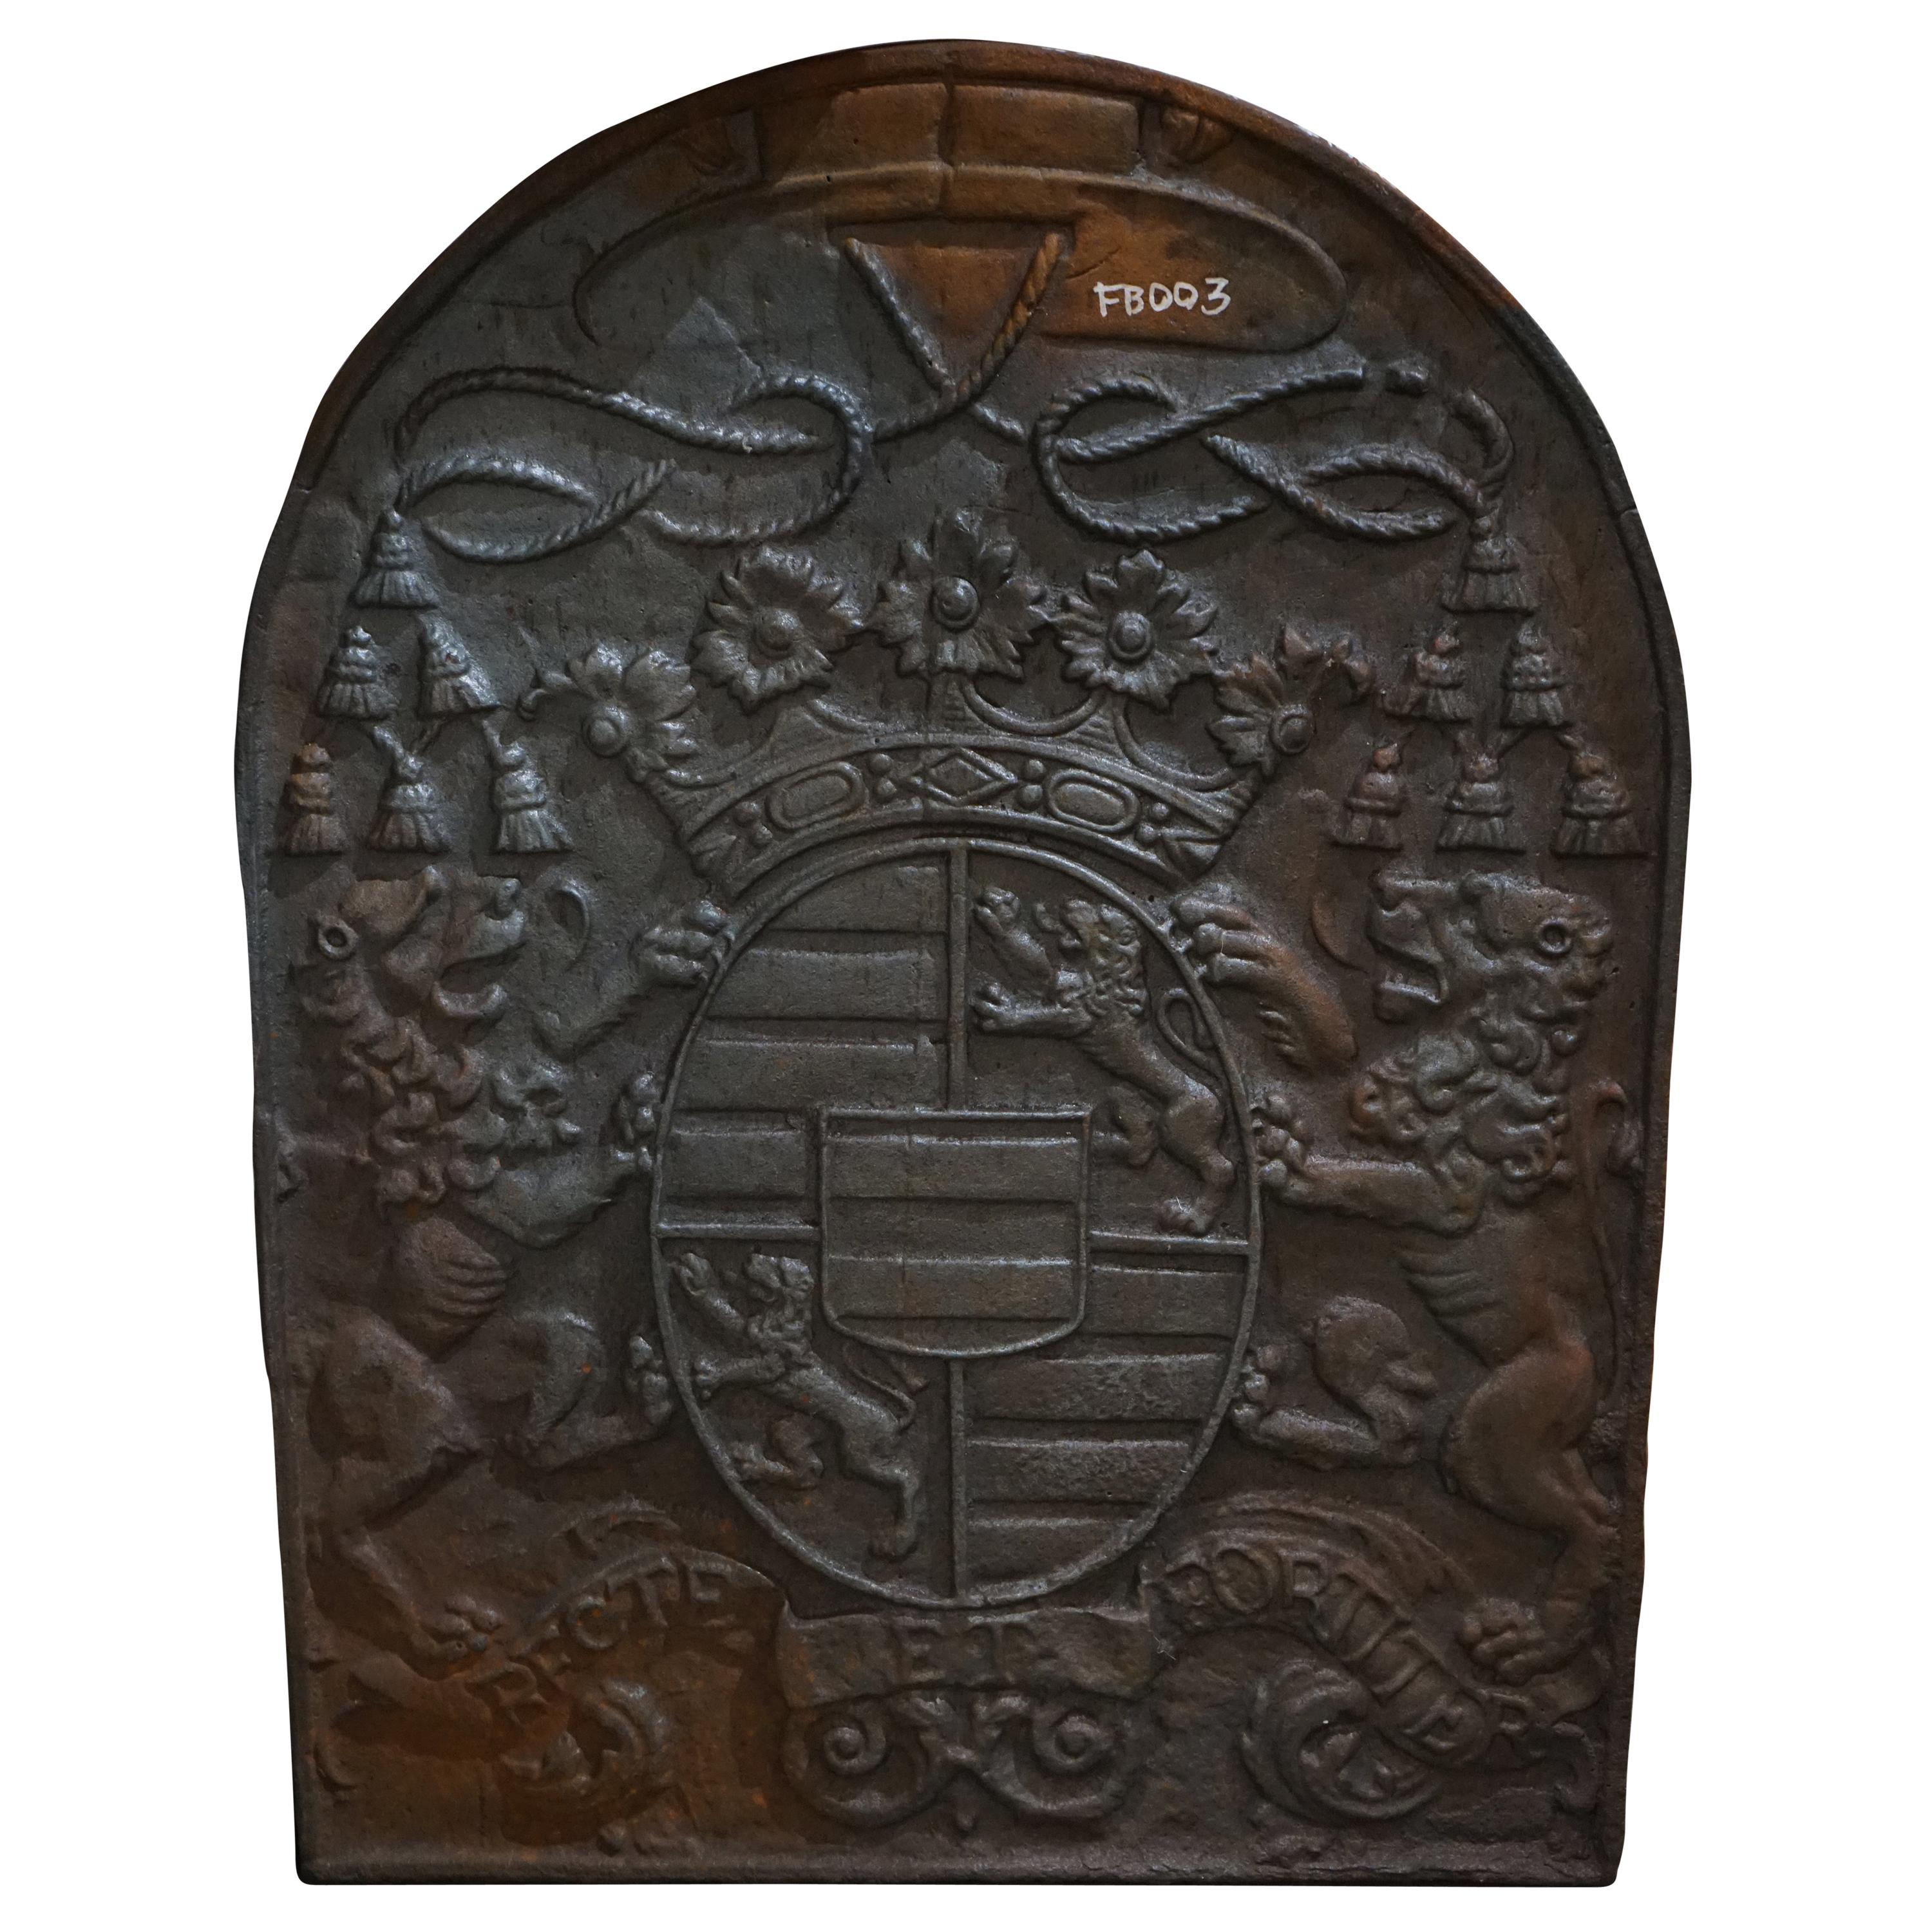 Antique Fireback Depicting Royal Coat of Arms